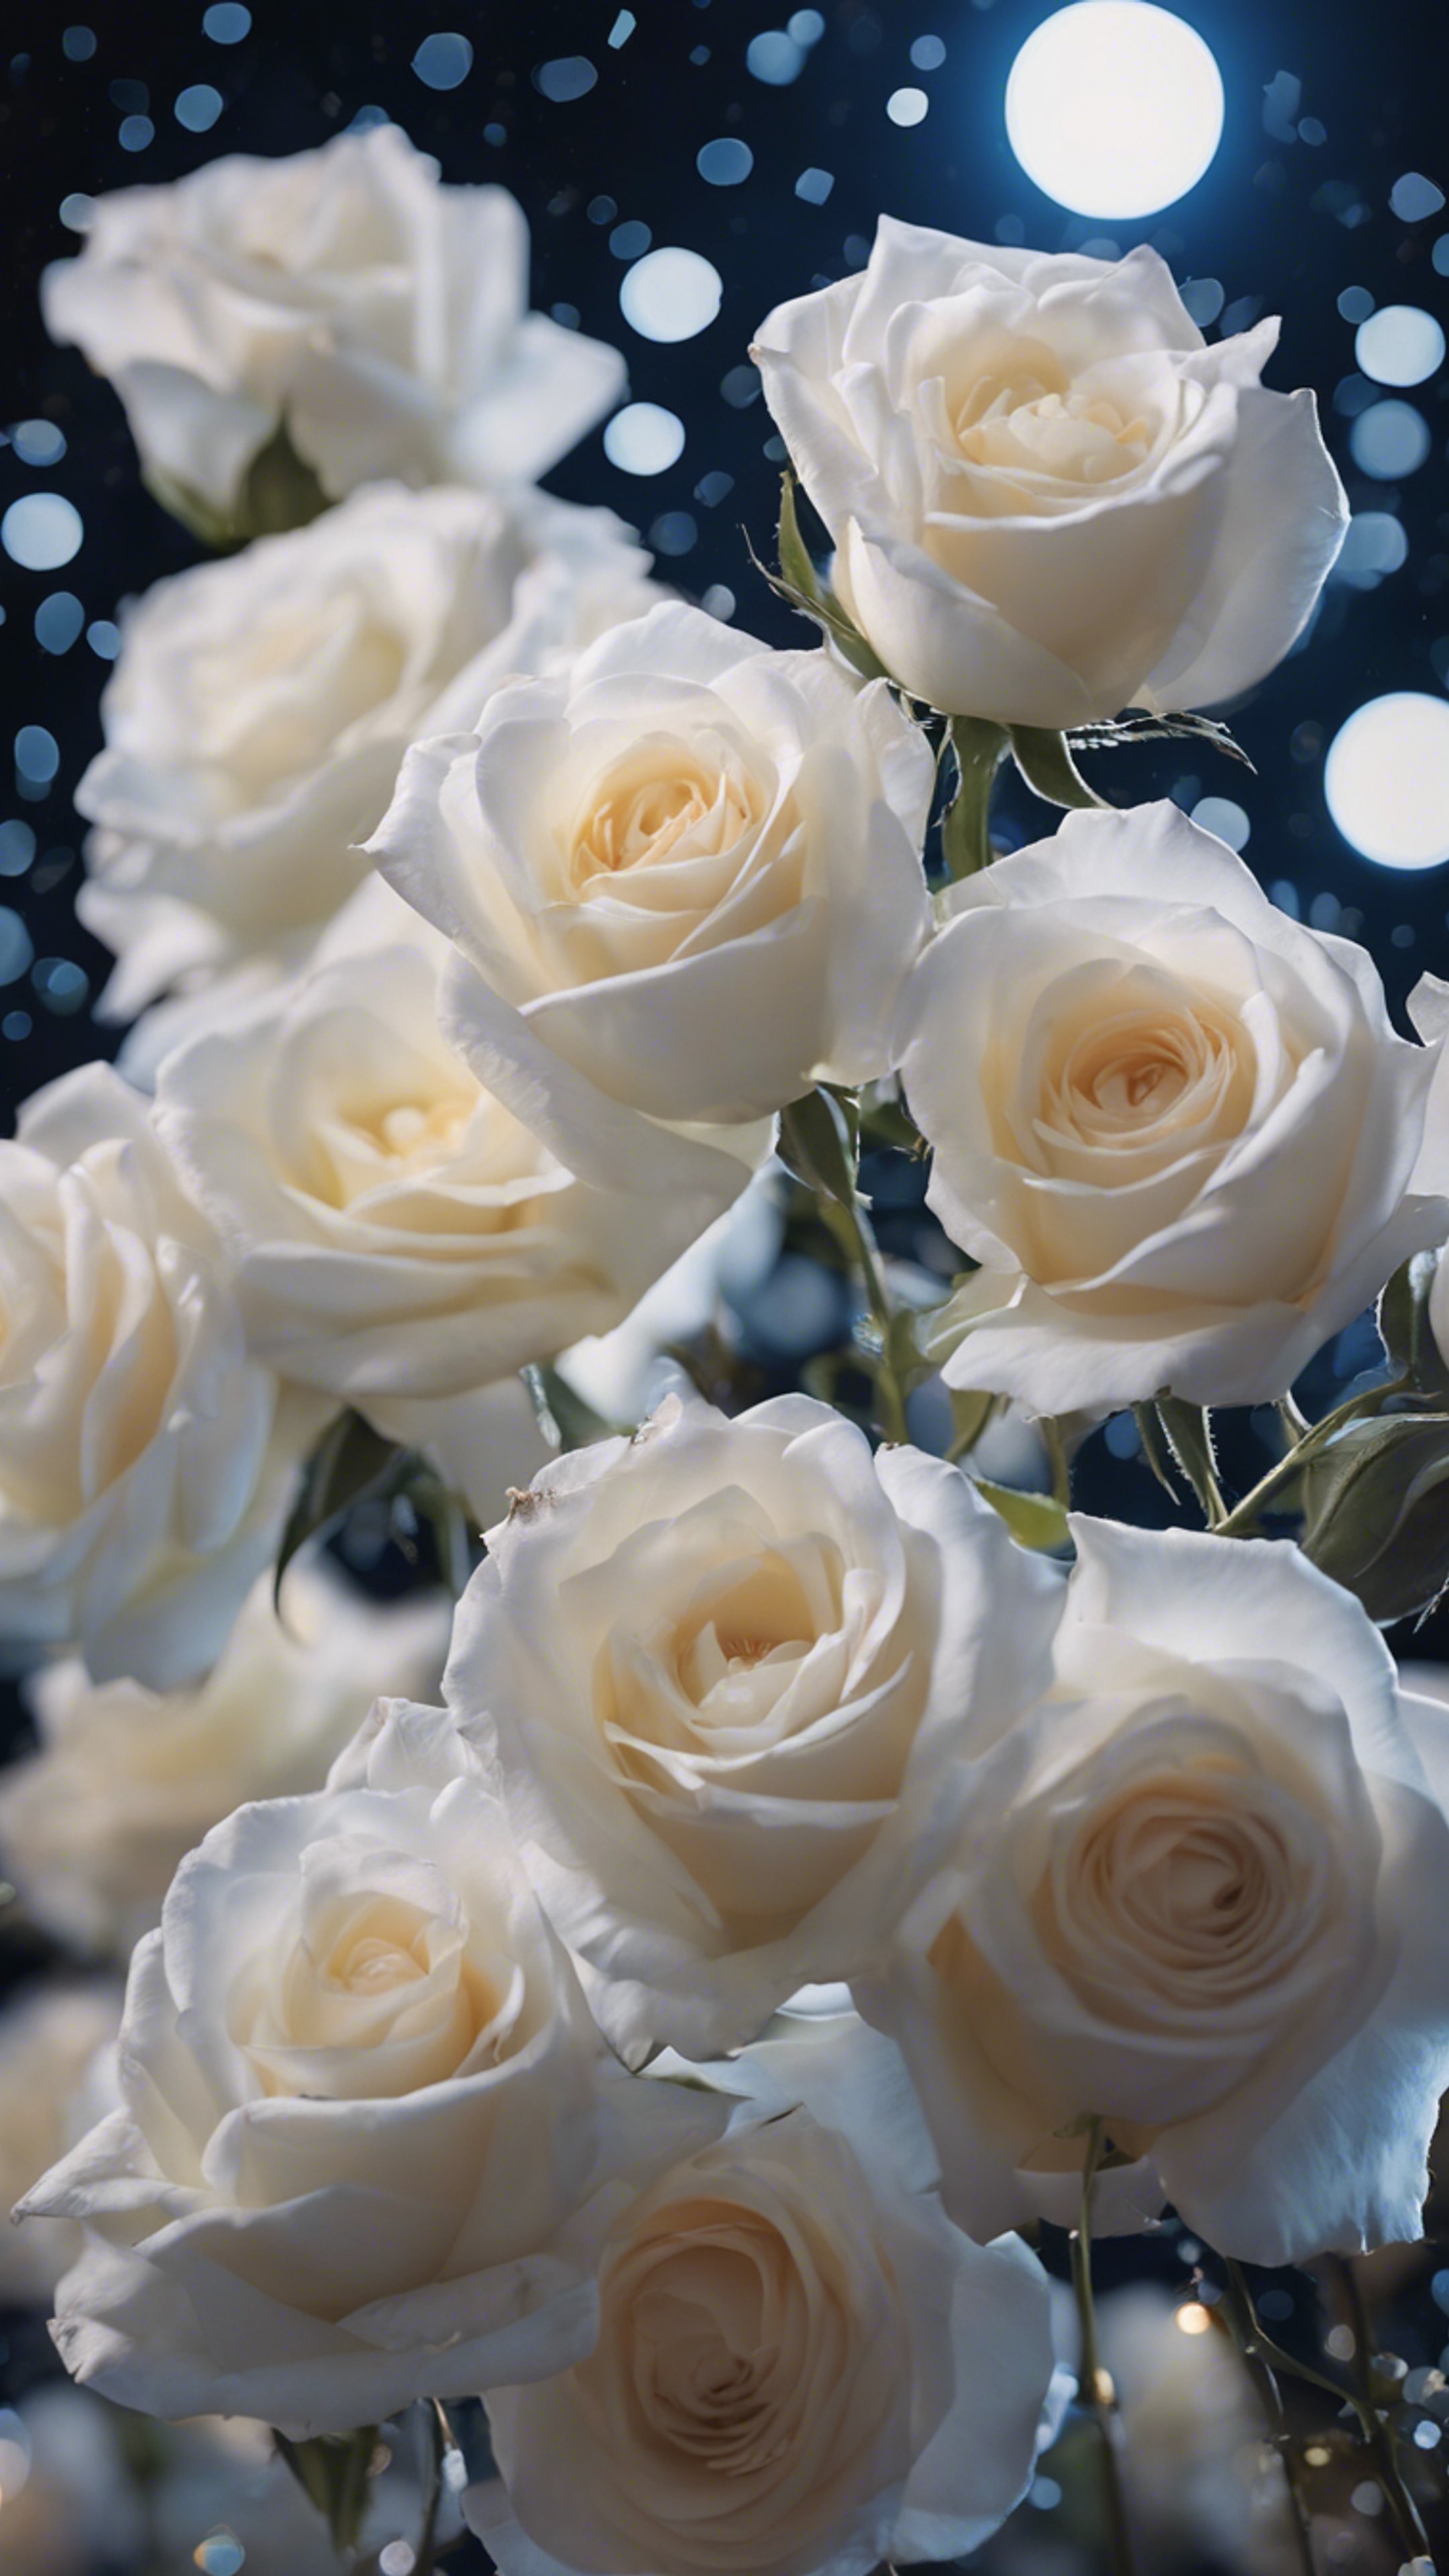 A constellation of white roses cascading across the midnight sky like a celestial bouquet.壁紙[f6fbcdc6971440f0a142]